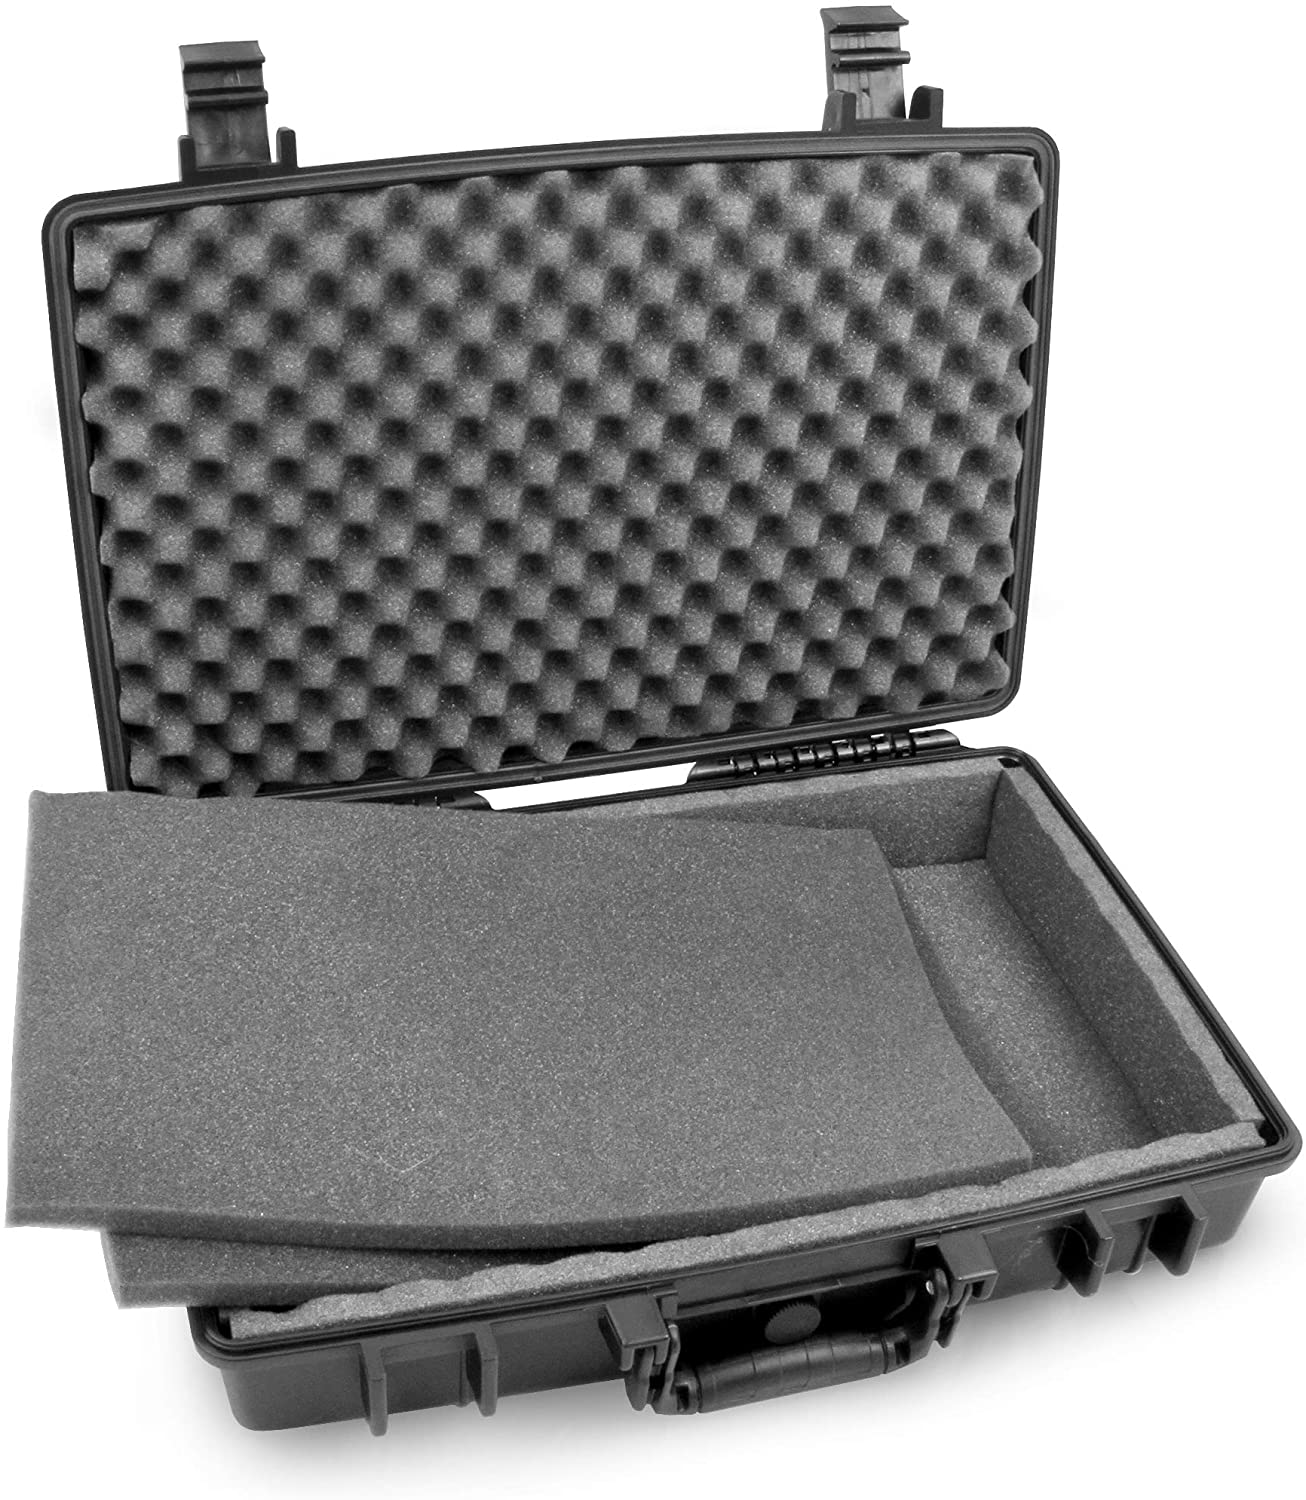 Casematix Waterproof Laptop Hard Case for 15-17 inch Gaming Laptops and Accessor